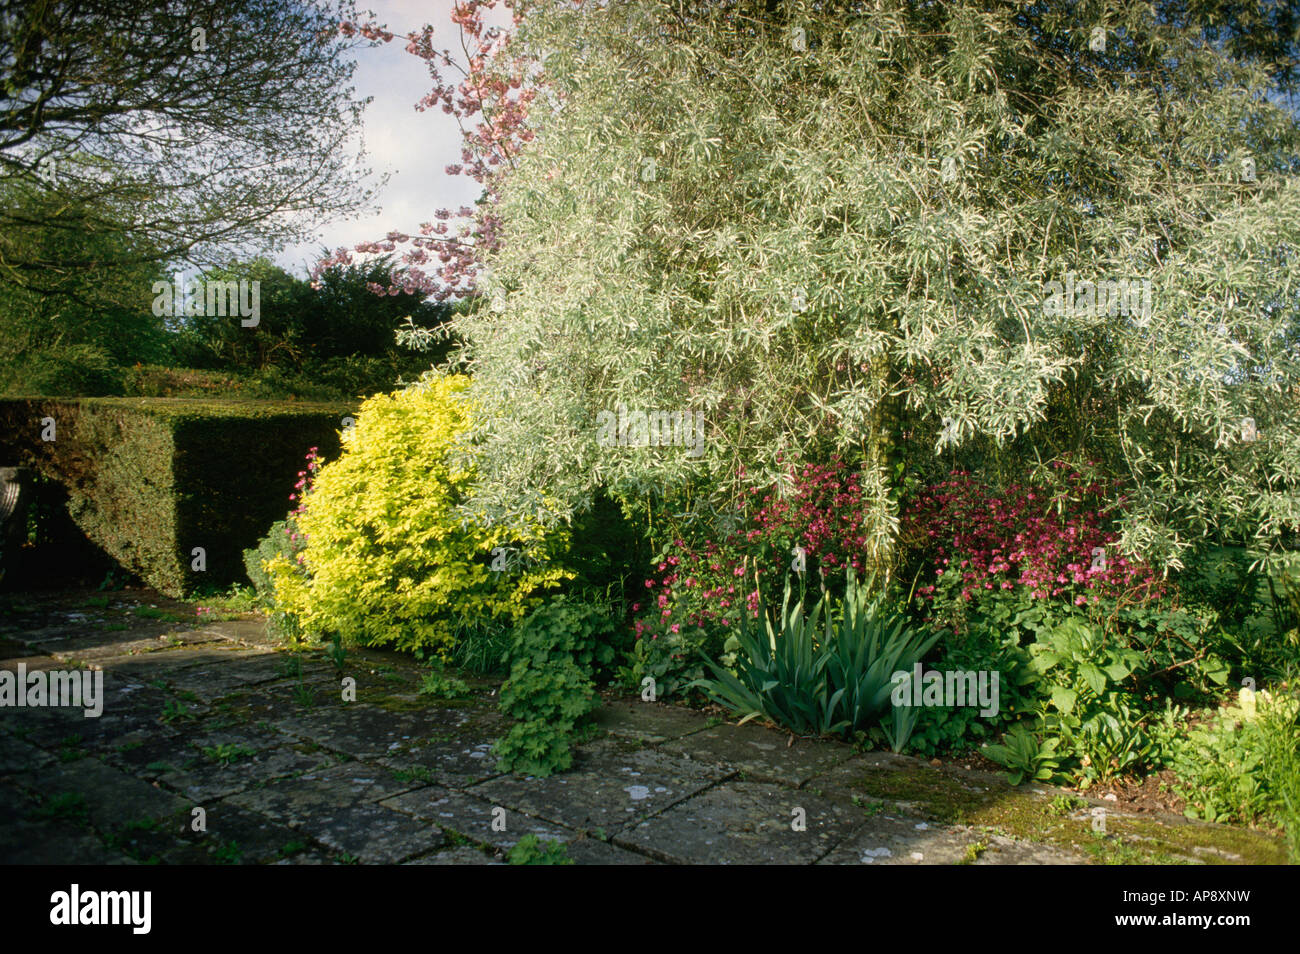 Pyrus Salicifolia Pendula in spring border in country garden with mossy paving Stock Photo